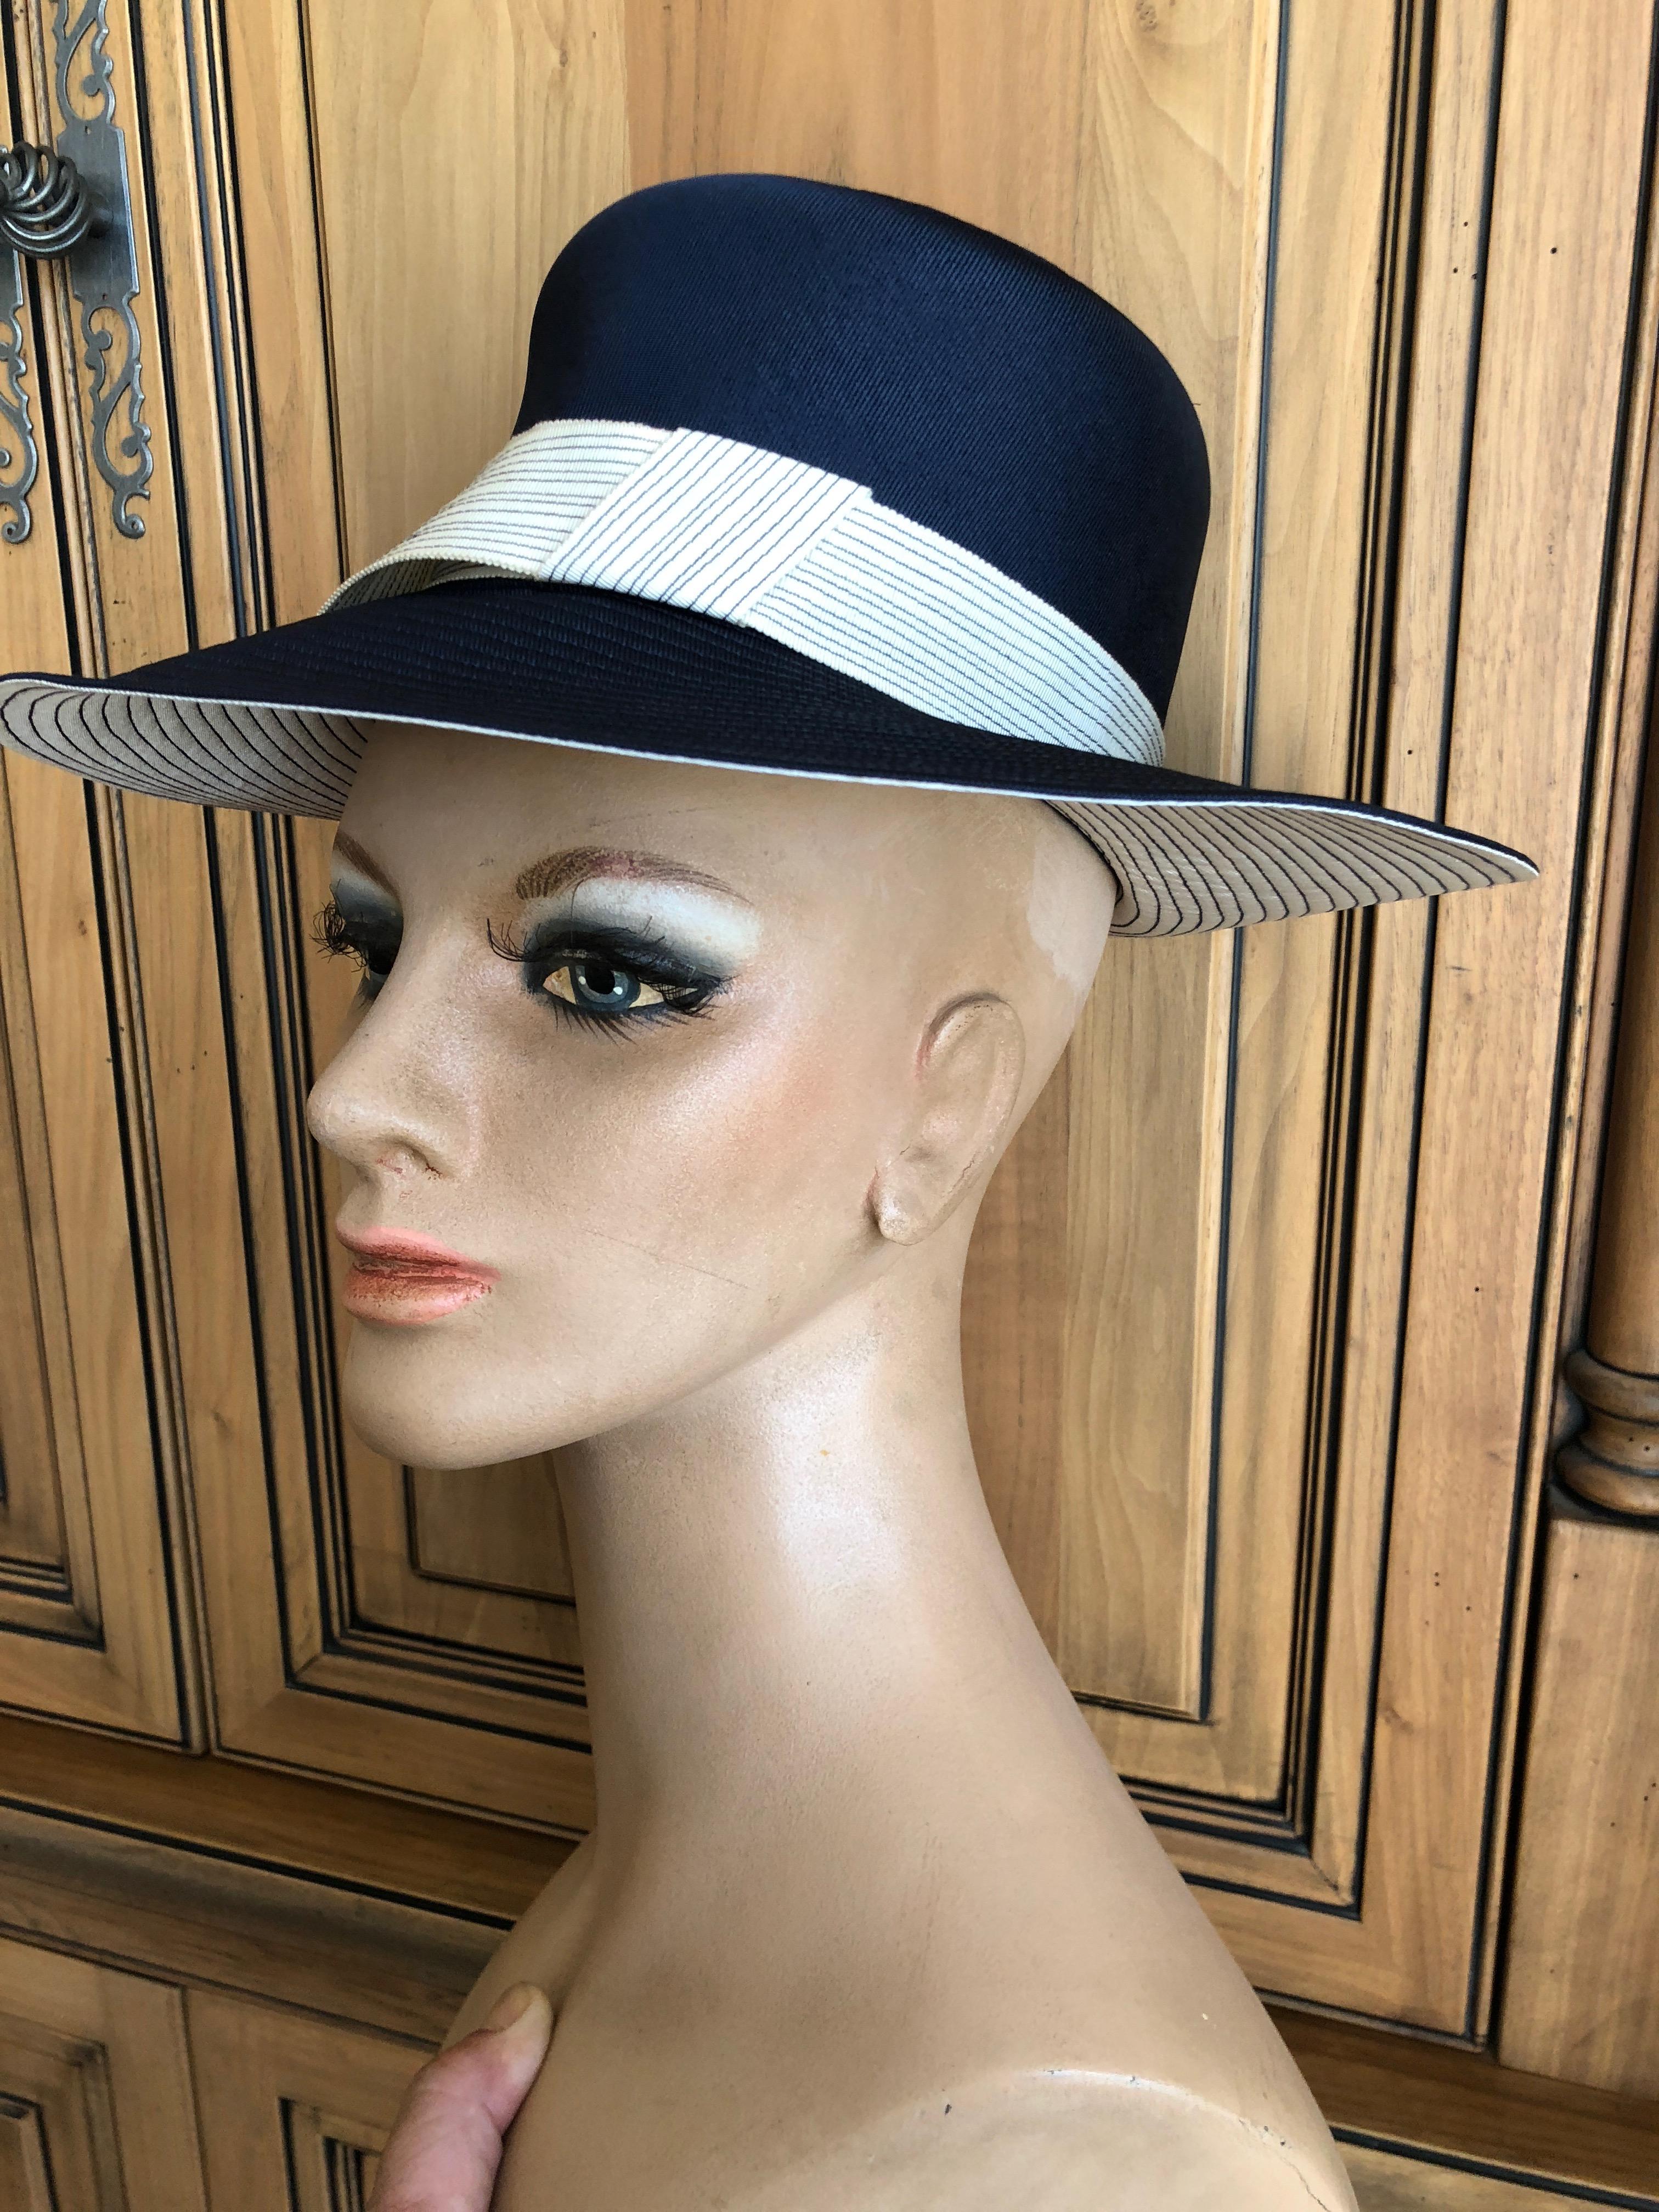 Lilly Daché for I. Magnin 1960 Deadstock Navy and Cream Fedora Hat
22.5 inch circumfrence